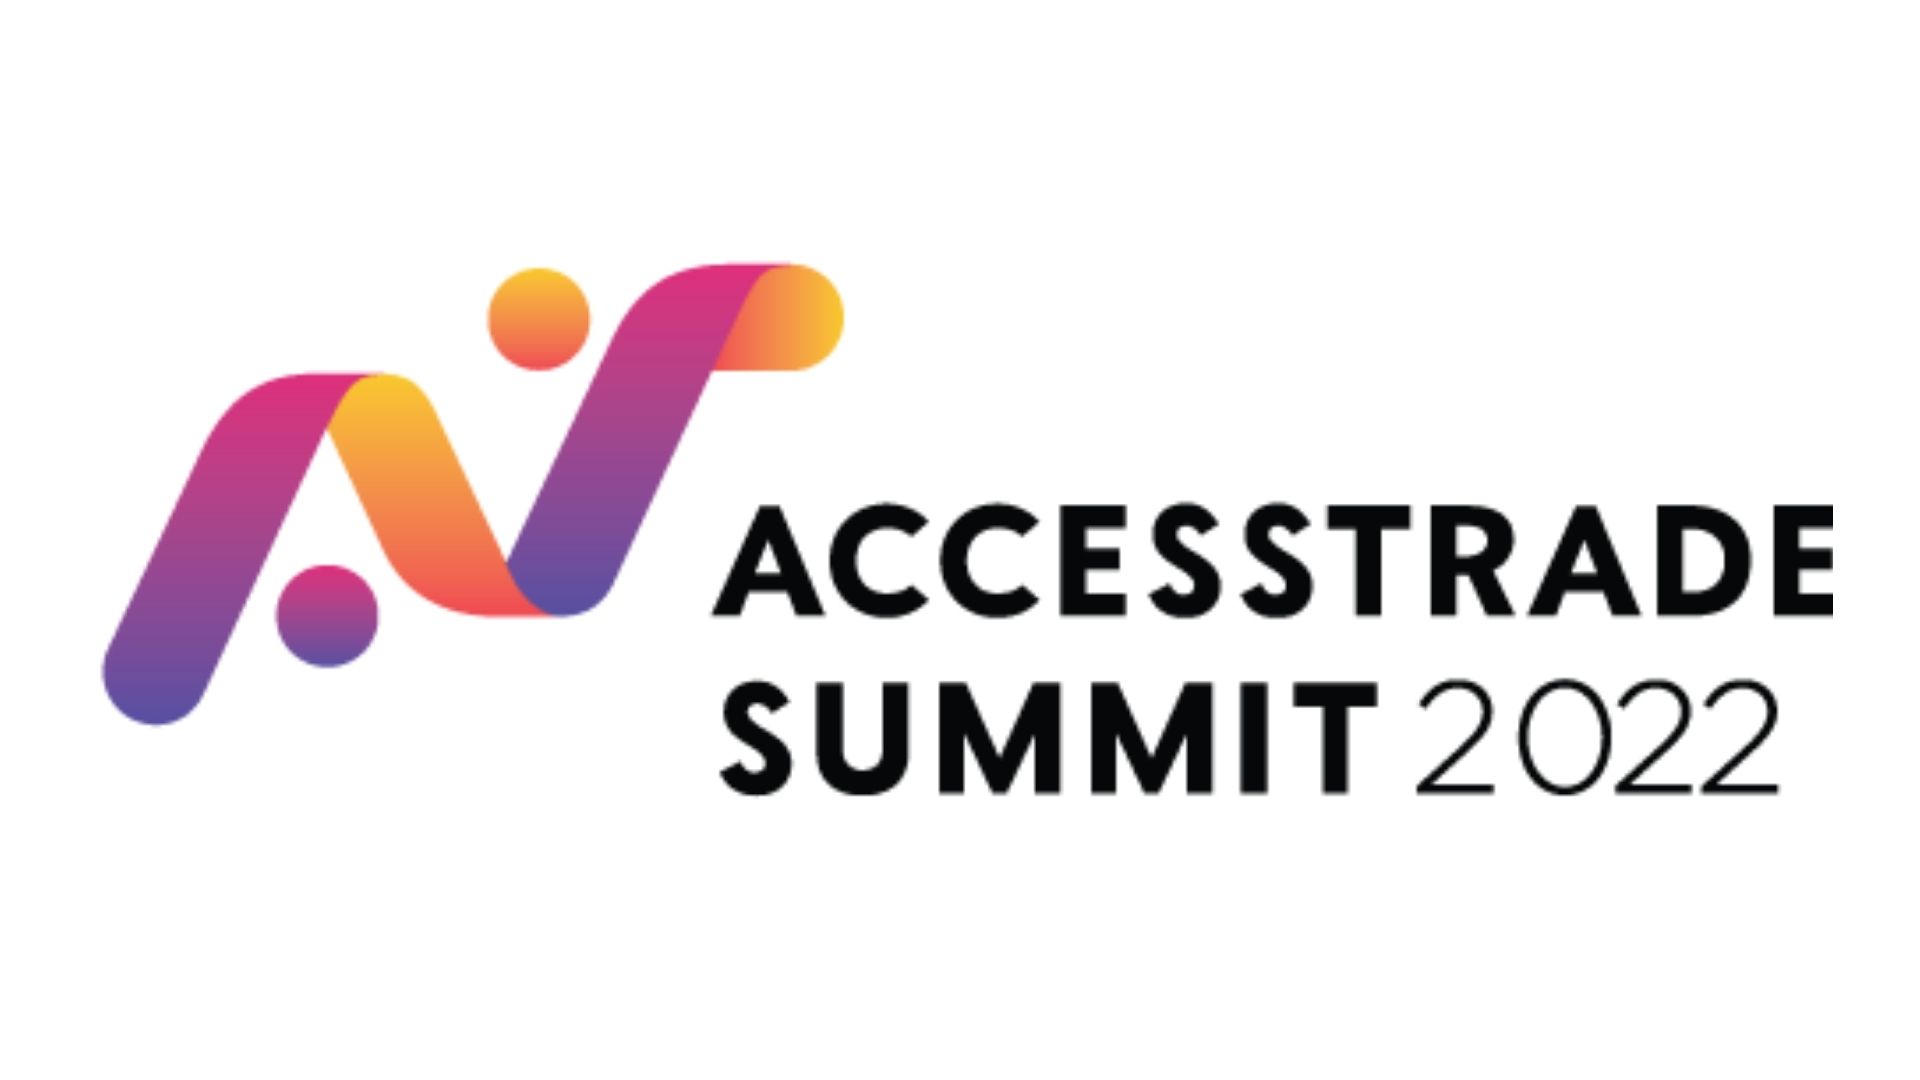 ACCESSTRADE's Global Conference, ACCESSTRADE SUMMIT is Coming Back in 2022